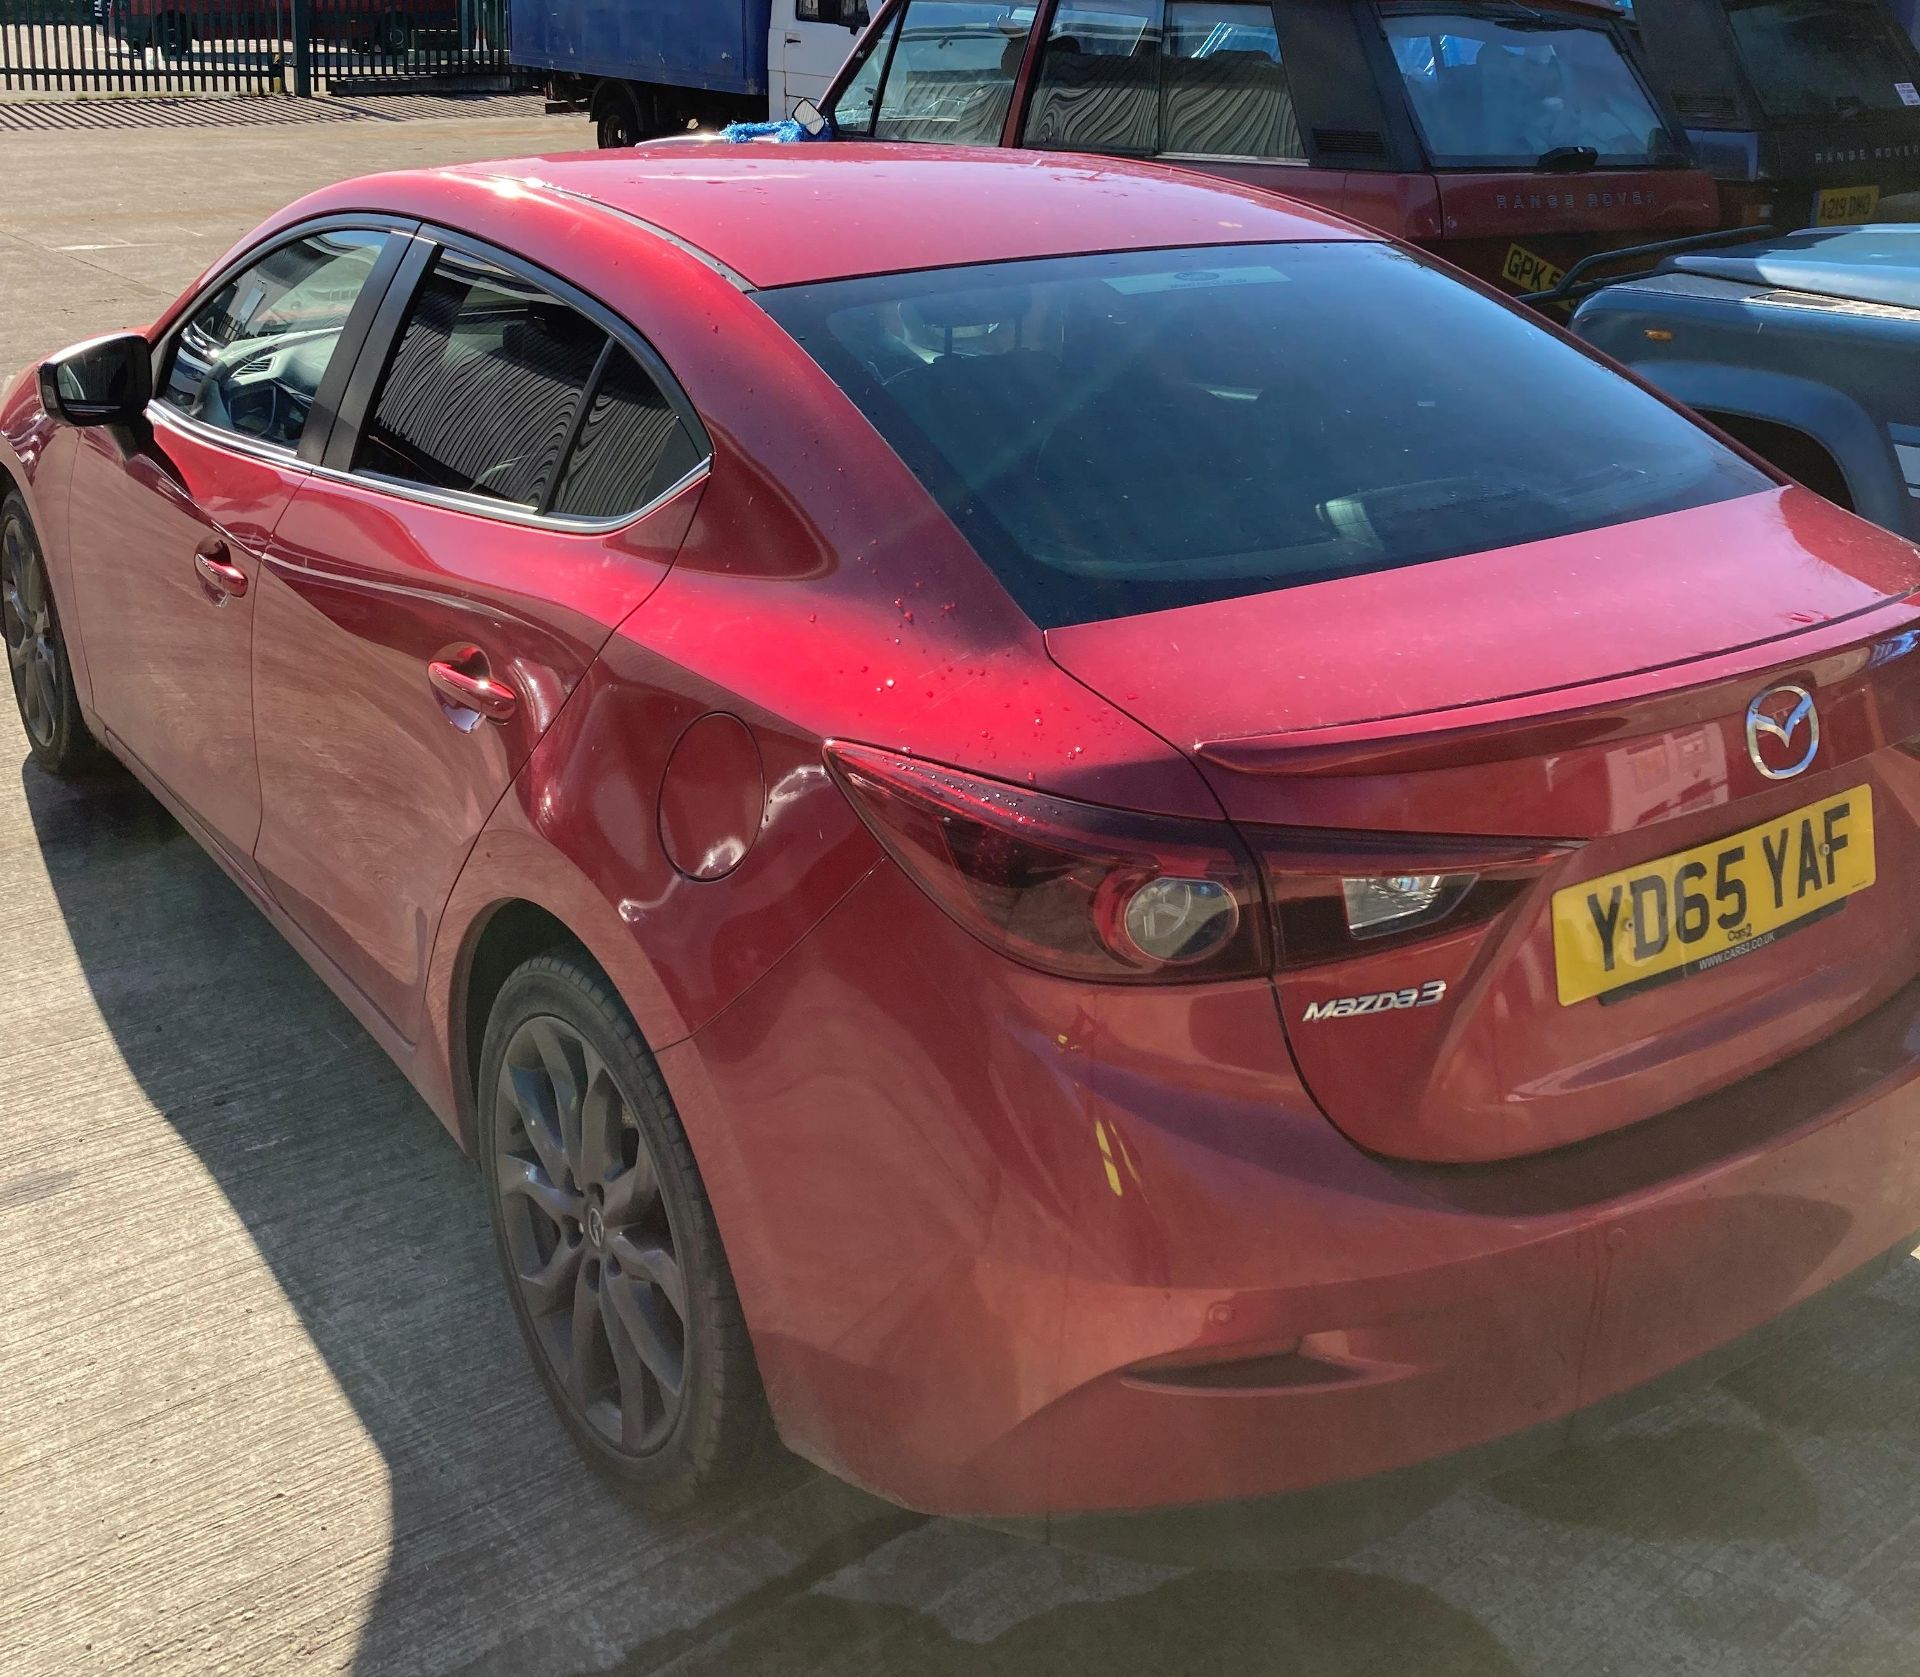 MAZDA 3 SPORT NAV 2.0 four door saloon - petrol - red with black leather interior. - Image 24 of 27